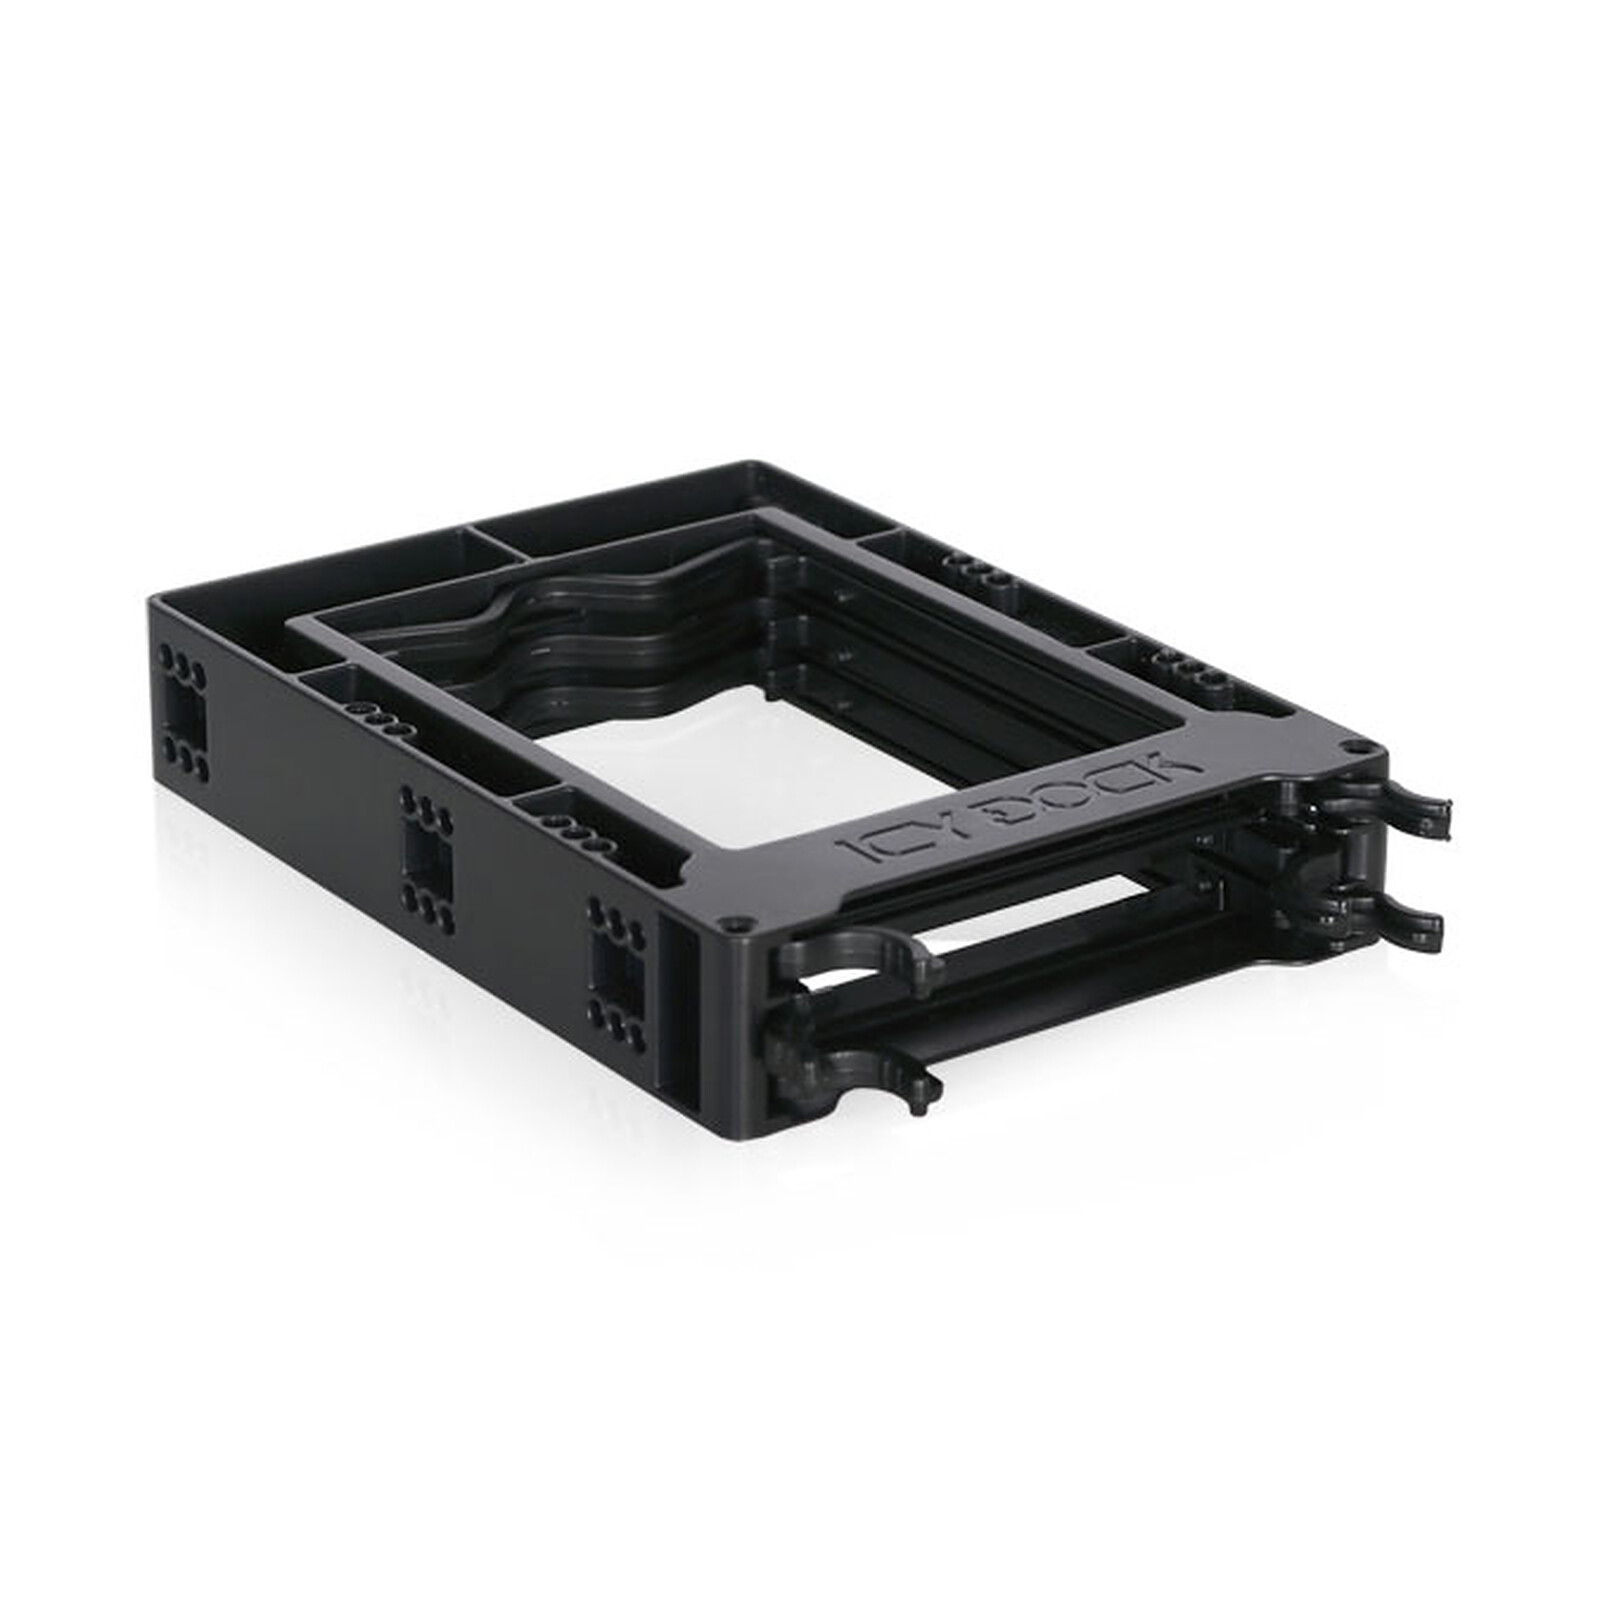 HEDEN Kit Adaptateur pour 2 HDD/SSD 2.5 vers baie 3.5 - 0